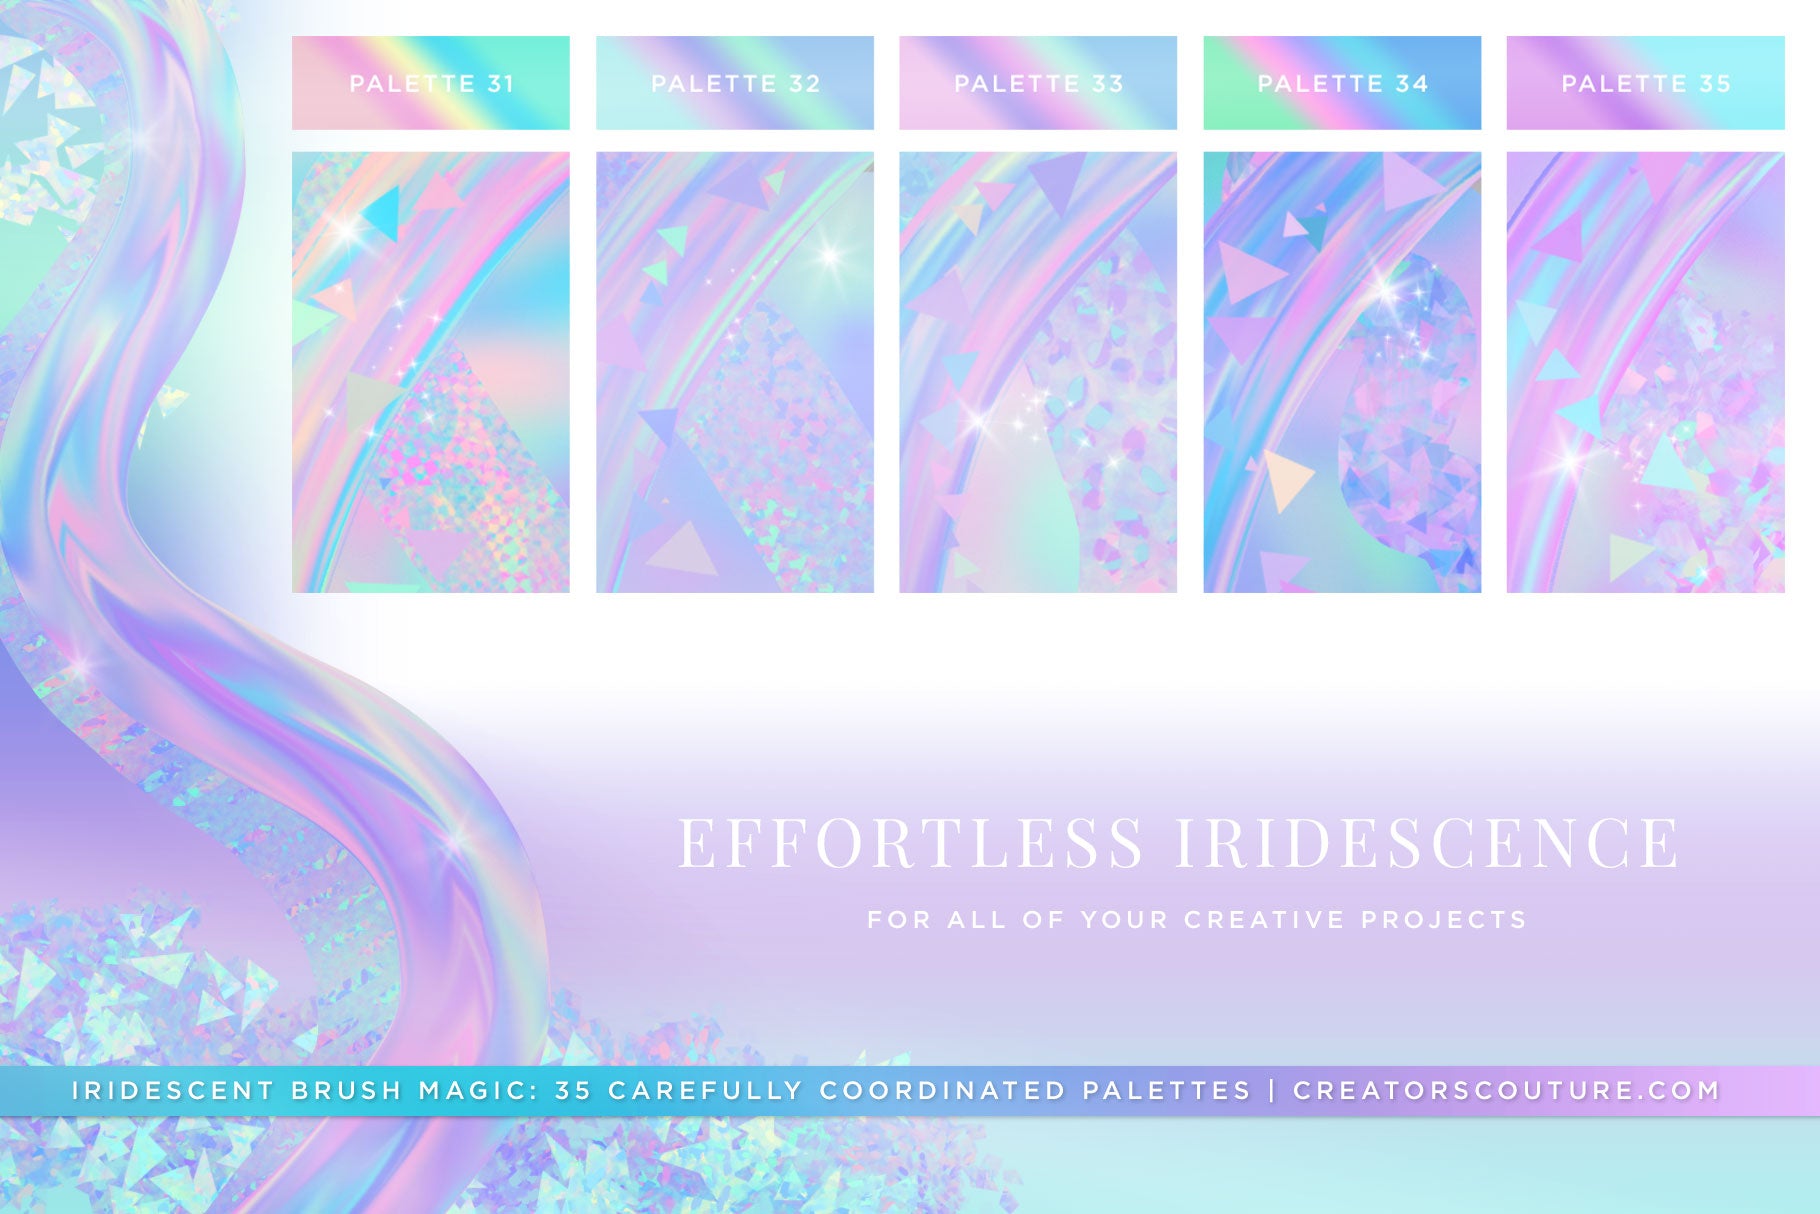 photoshop brushes for instant iridescent and holographic effects and brush strokes, iridescent palette preview chart 4